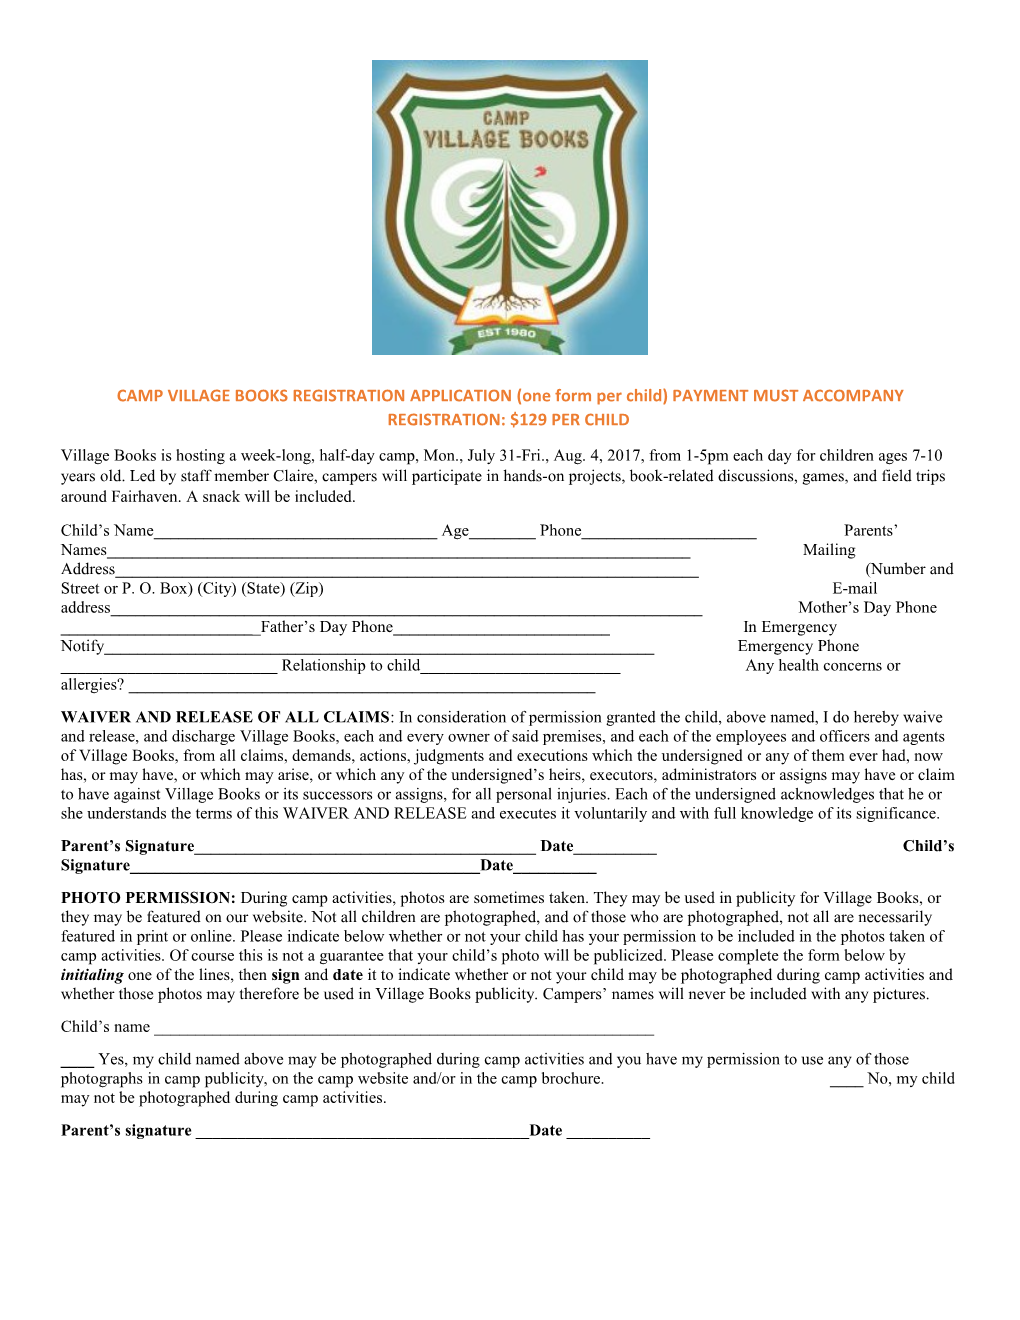 CAMP VILLAGE BOOKS REGISTRATION APPLICATION (One Form Per Child) PAYMENT MUST ACCOMPANY